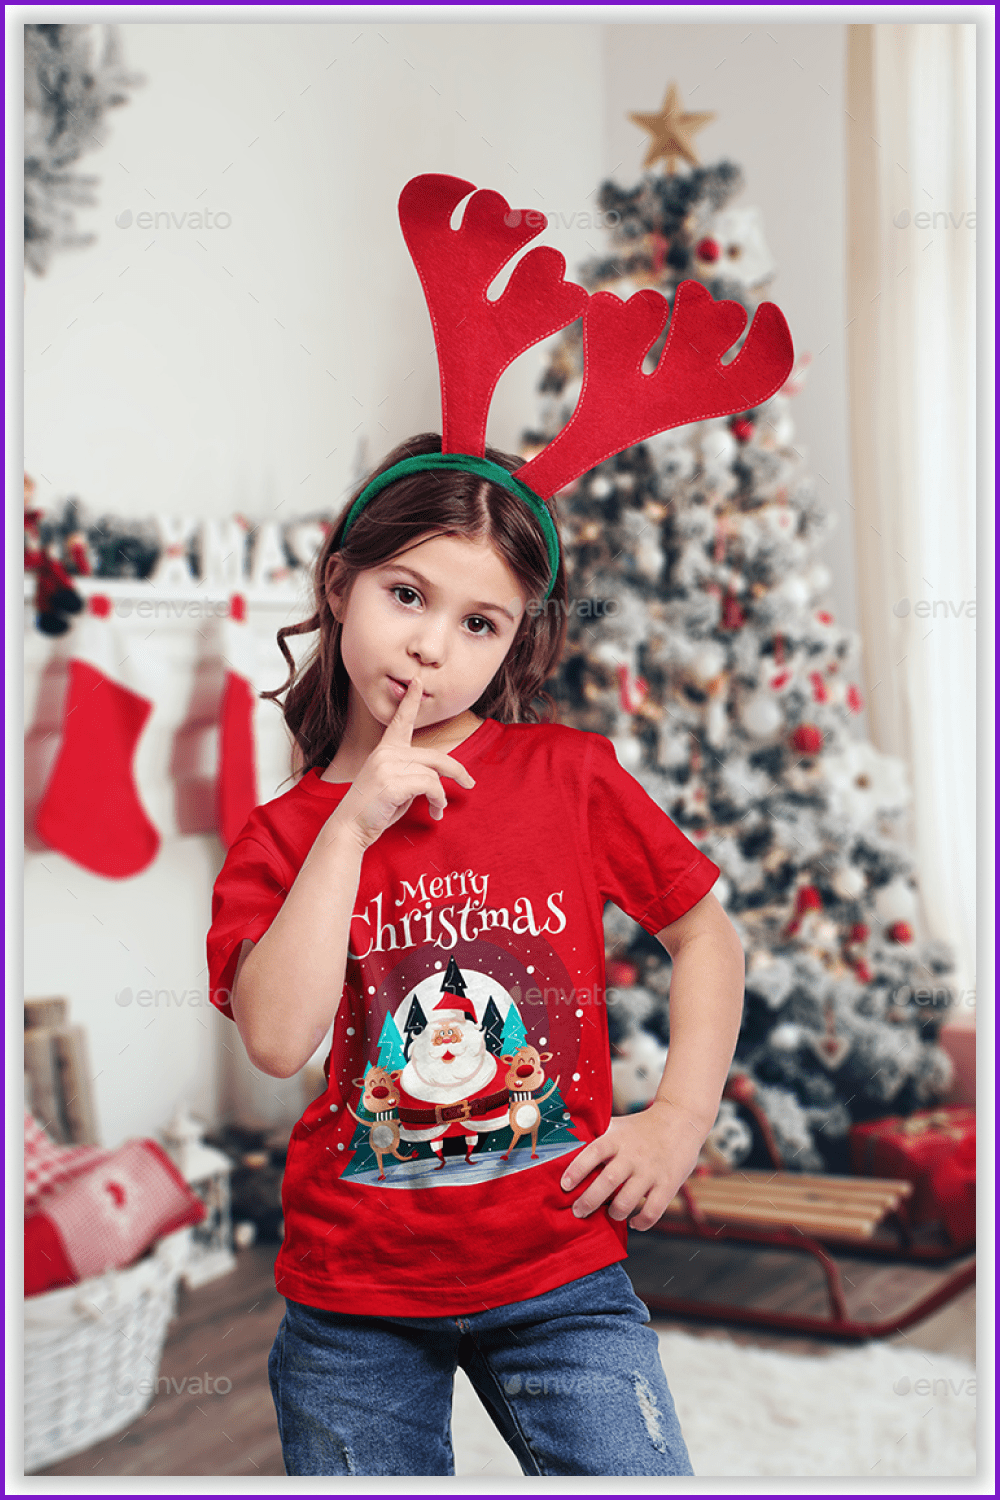 Girl with a bright mockups for kids with Santa Claus and funny deer.